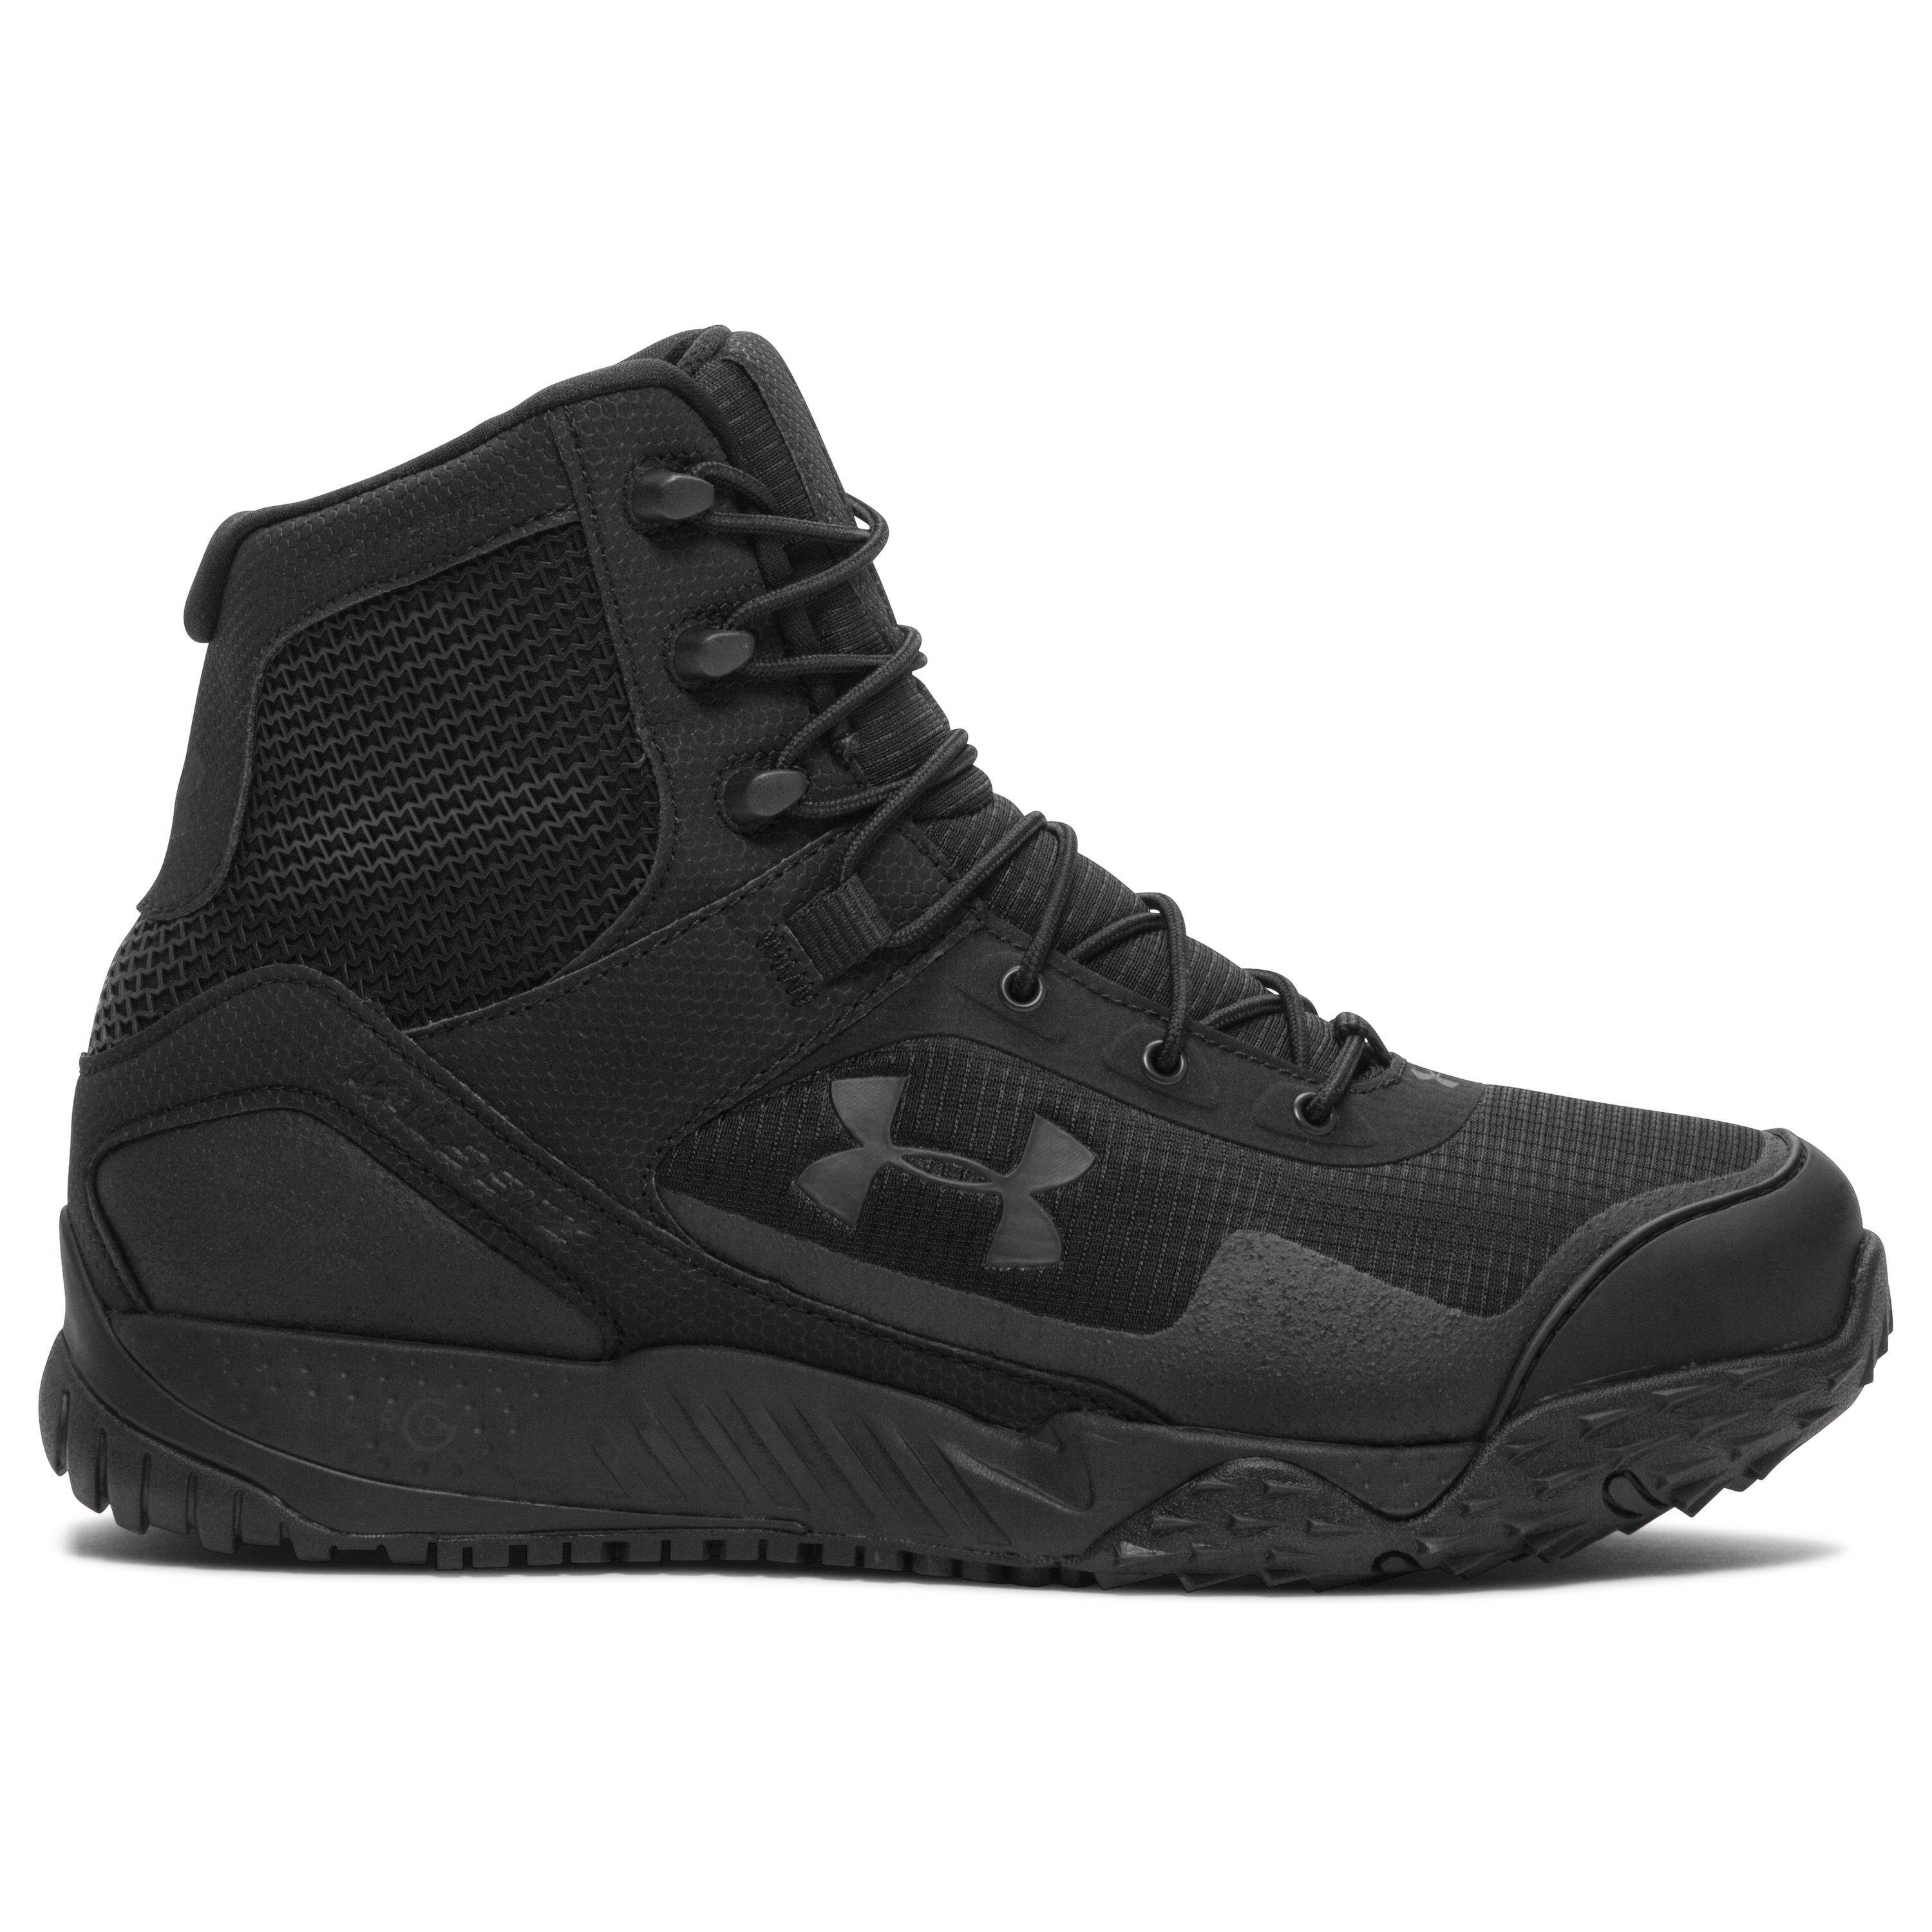 under armour waterproof boots